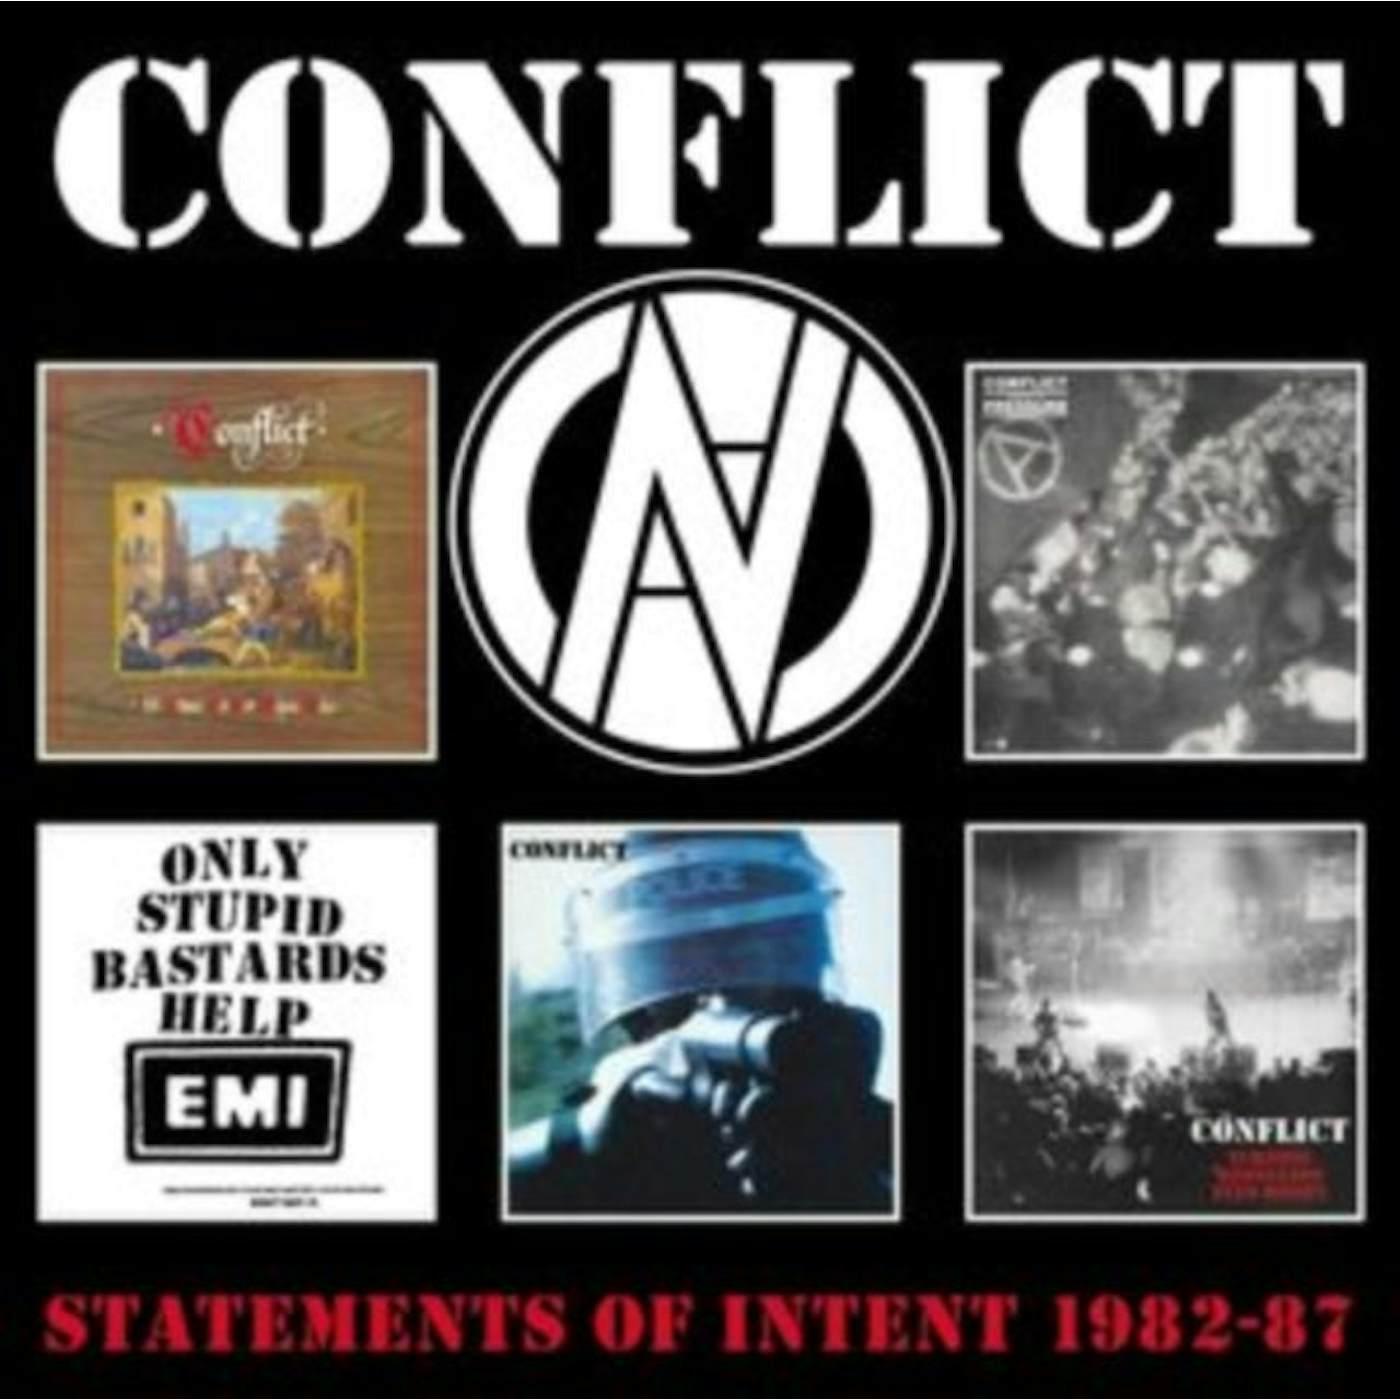 Conflict CD - Statements Of Intent 19 82-87